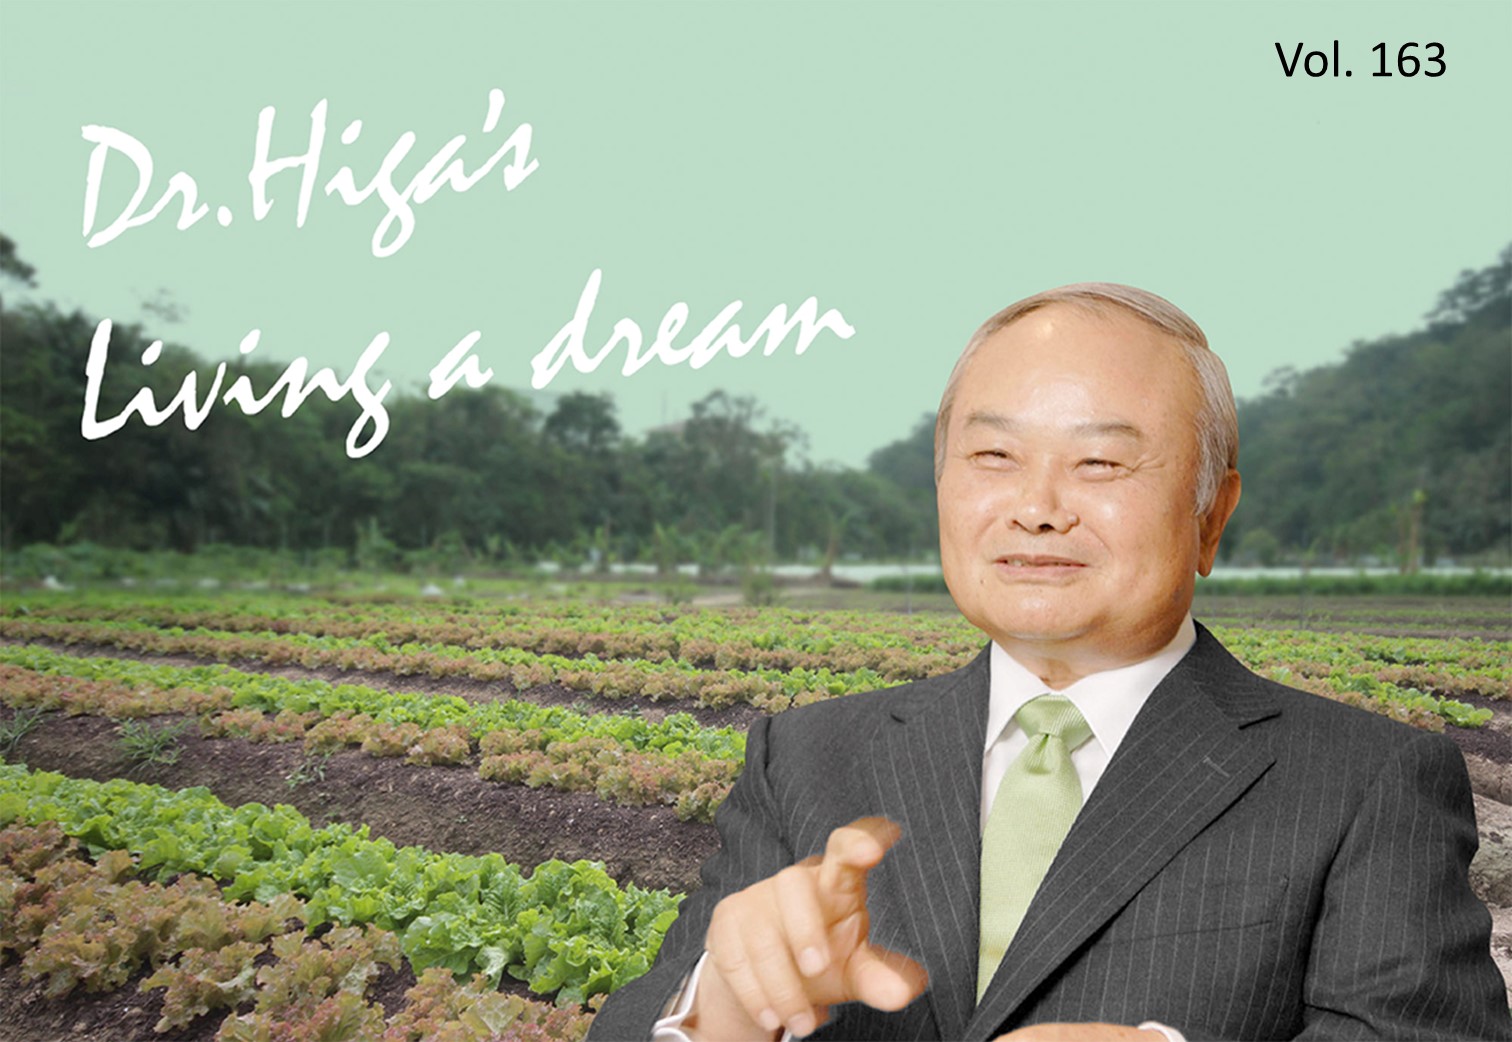 Dr. Higa's "Living a Dream": the latest article #163 is UP!!